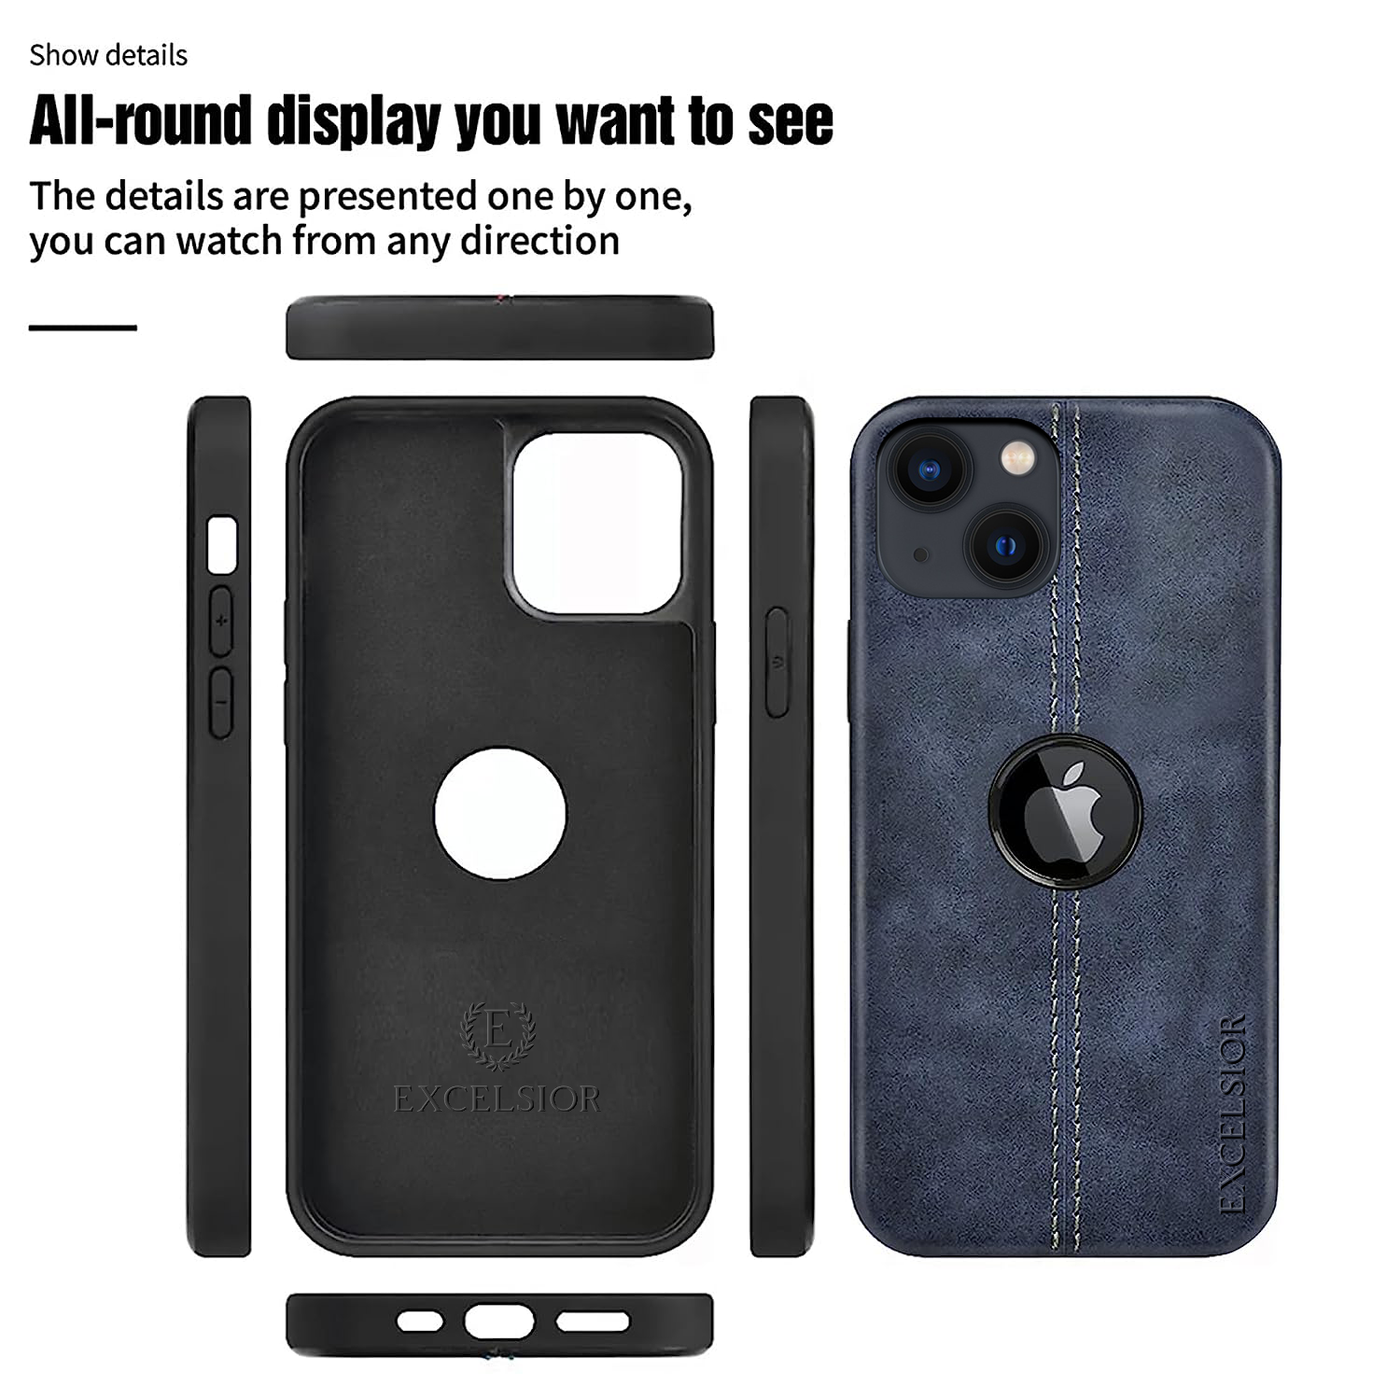 Excelsior Premium Retro PU Leather Back Cover case For Apple iPhone 13